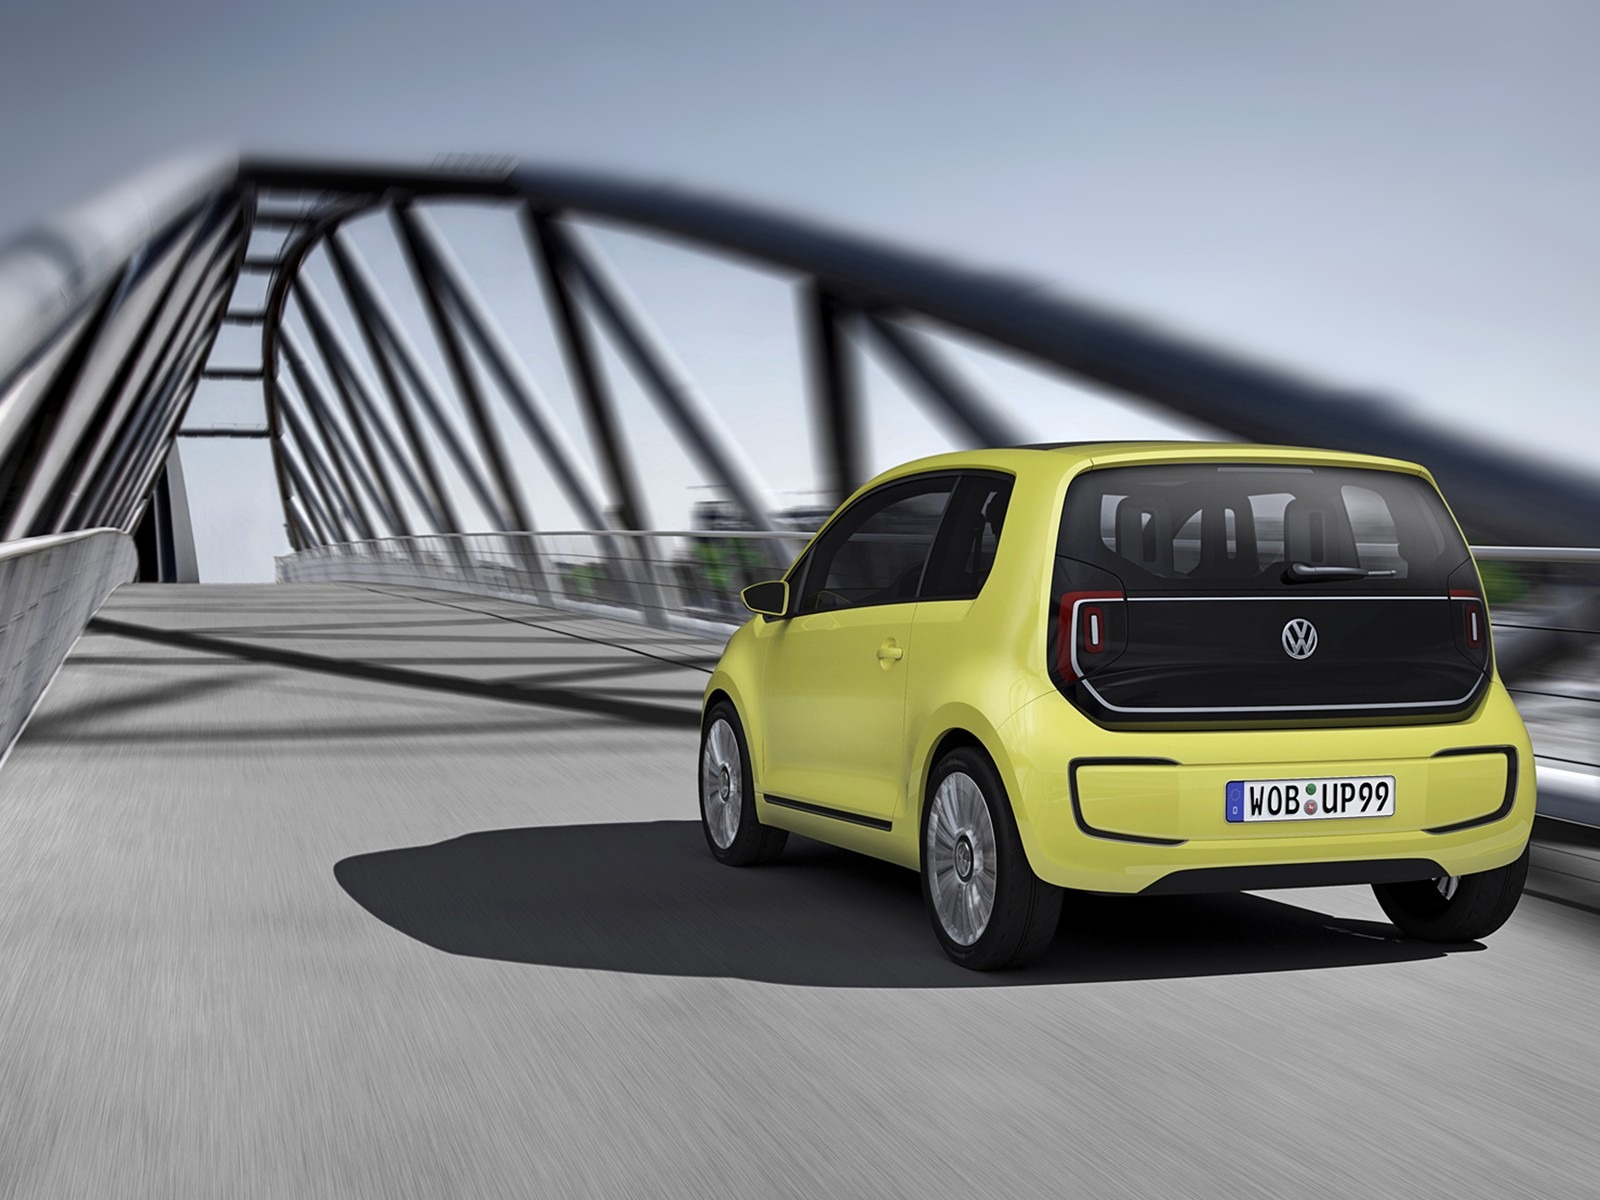 Volkswagen Concept Car tapety (2) #16 - 1600x1200